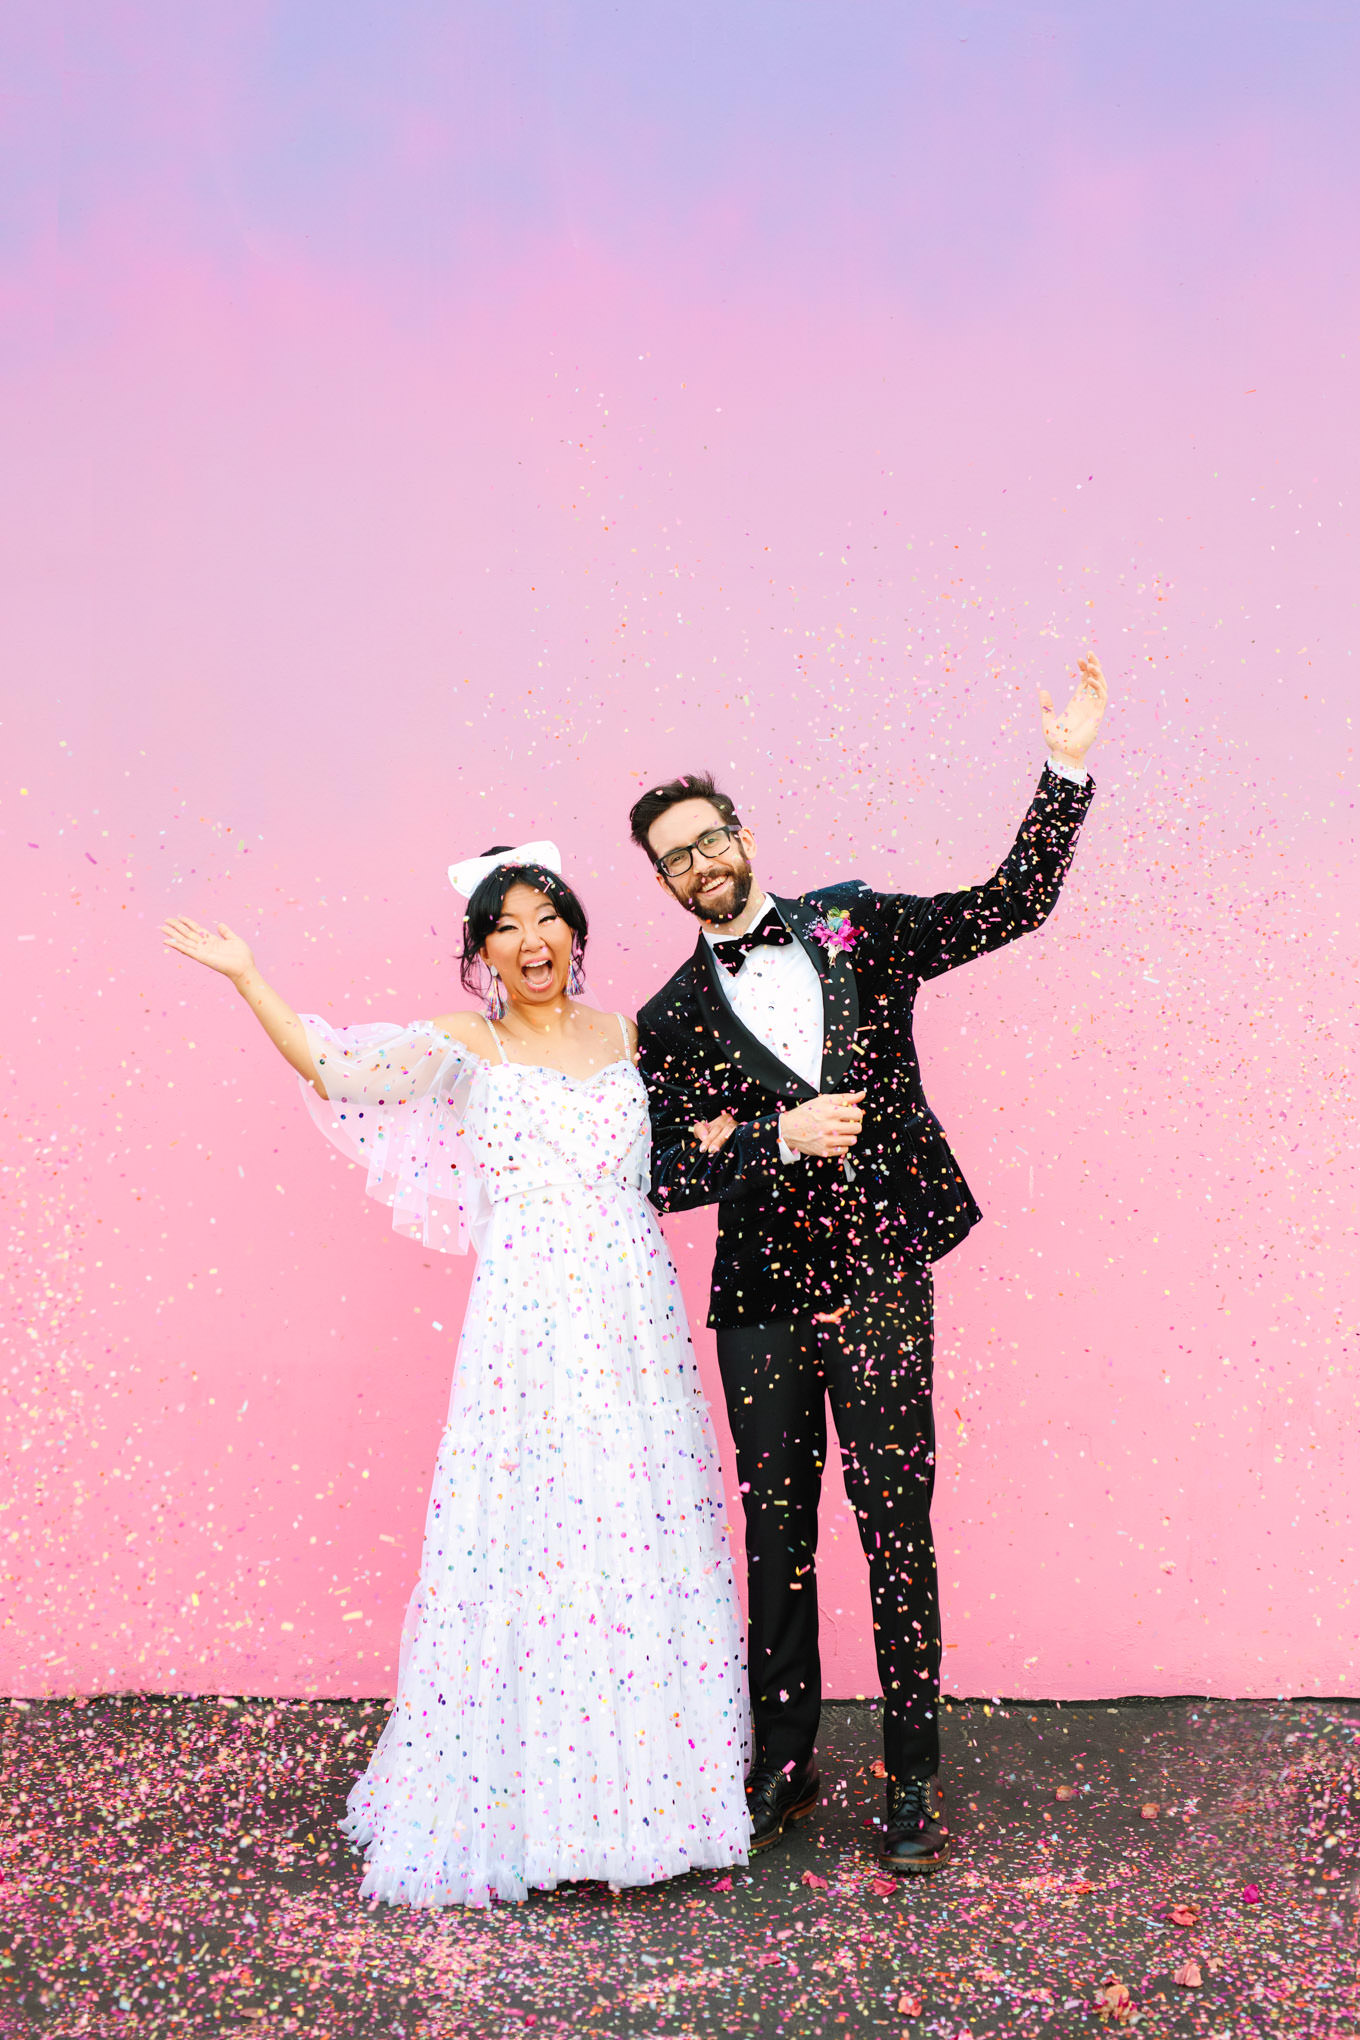 Confetti toss at colorful pink wall elopement | Engagement, elopement, and wedding photography roundup of Mary Costa’s favorite images from 2020 | Colorful and elevated photography for fun-loving couples in Southern California | #2020wedding #elopement #weddingphoto #weddingphotography #microwedding   Source: Mary Costa Photography | Los Angeles